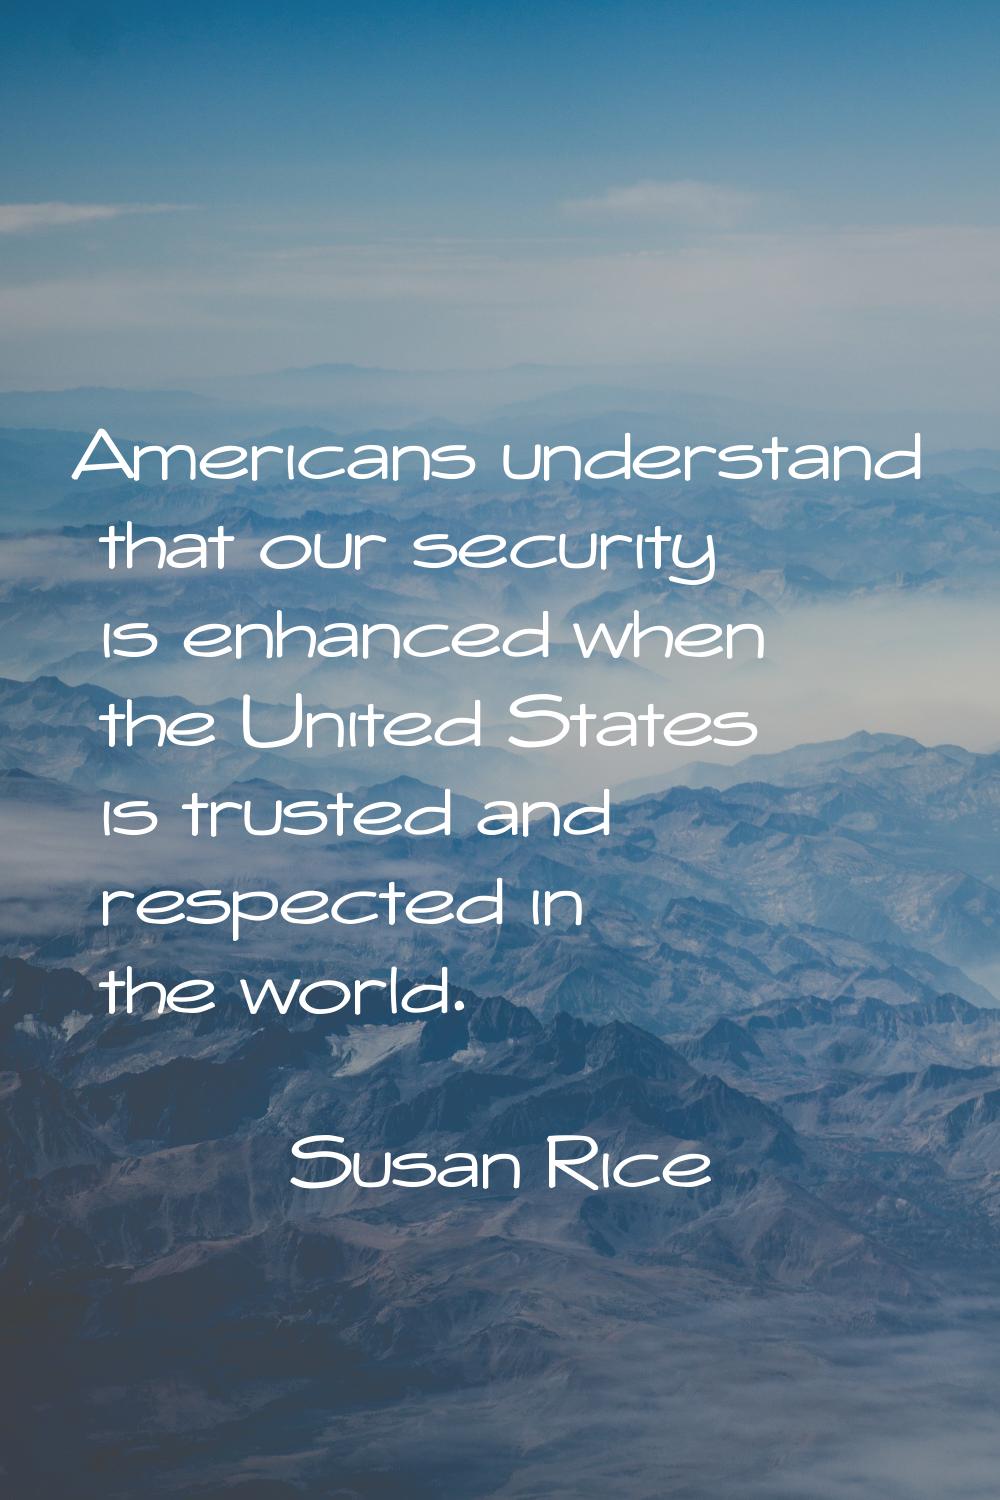 Americans understand that our security is enhanced when the United States is trusted and respected 